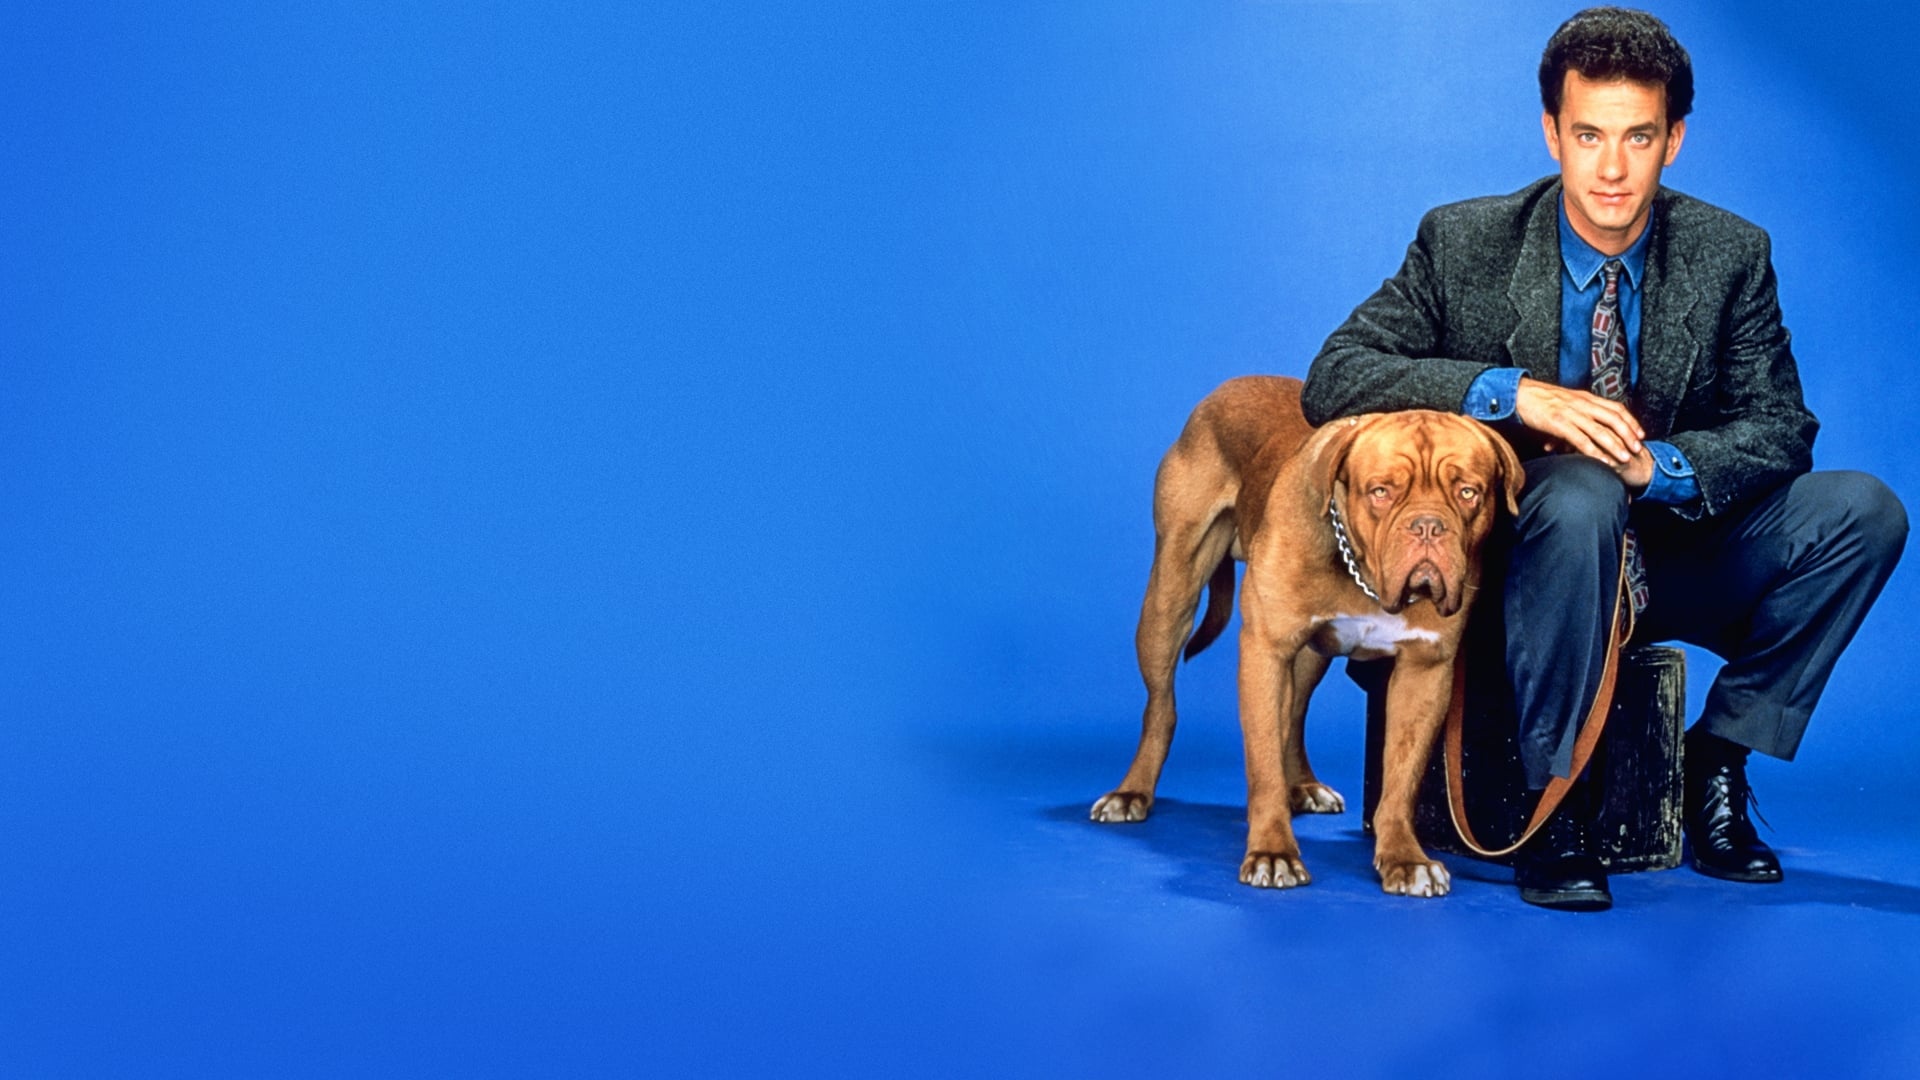 Turner and Hooch: Detective and his unlikely canine partner, assigned to investigate the thefts of strange objects around town. 1920x1080 Full HD Background.